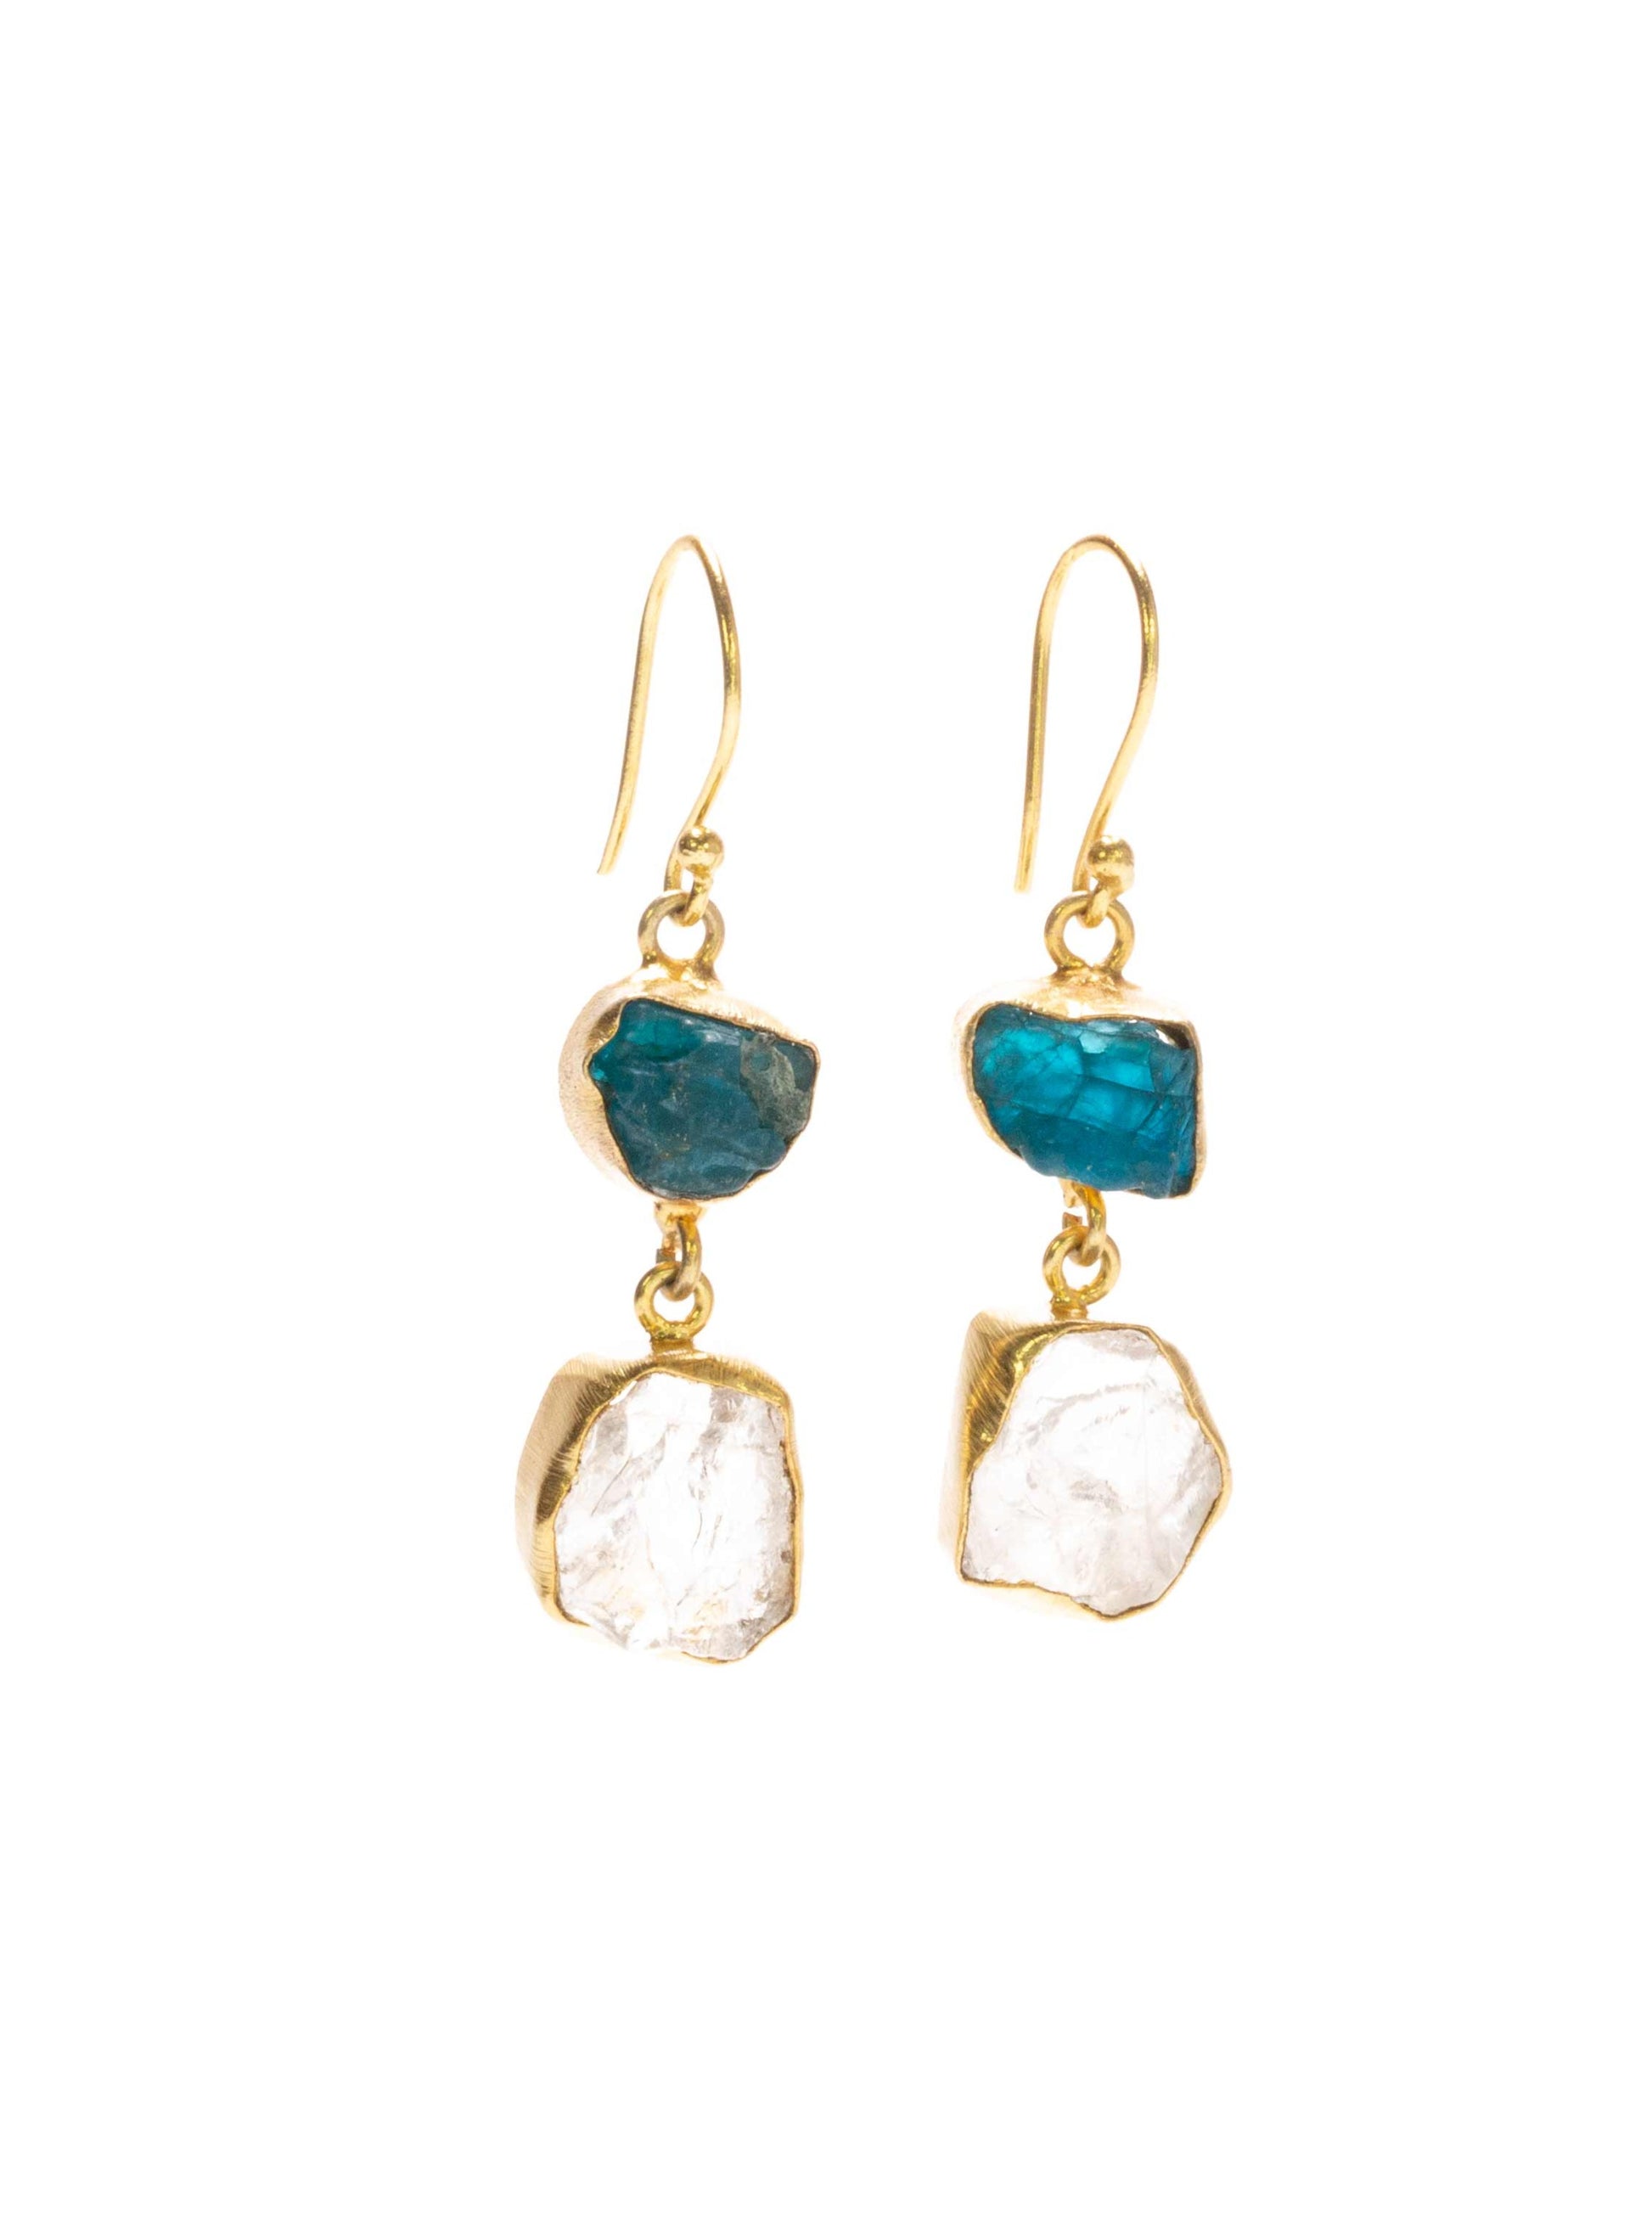 Gold Luxe earrings - neon apatite and clear quartz double drop dangles